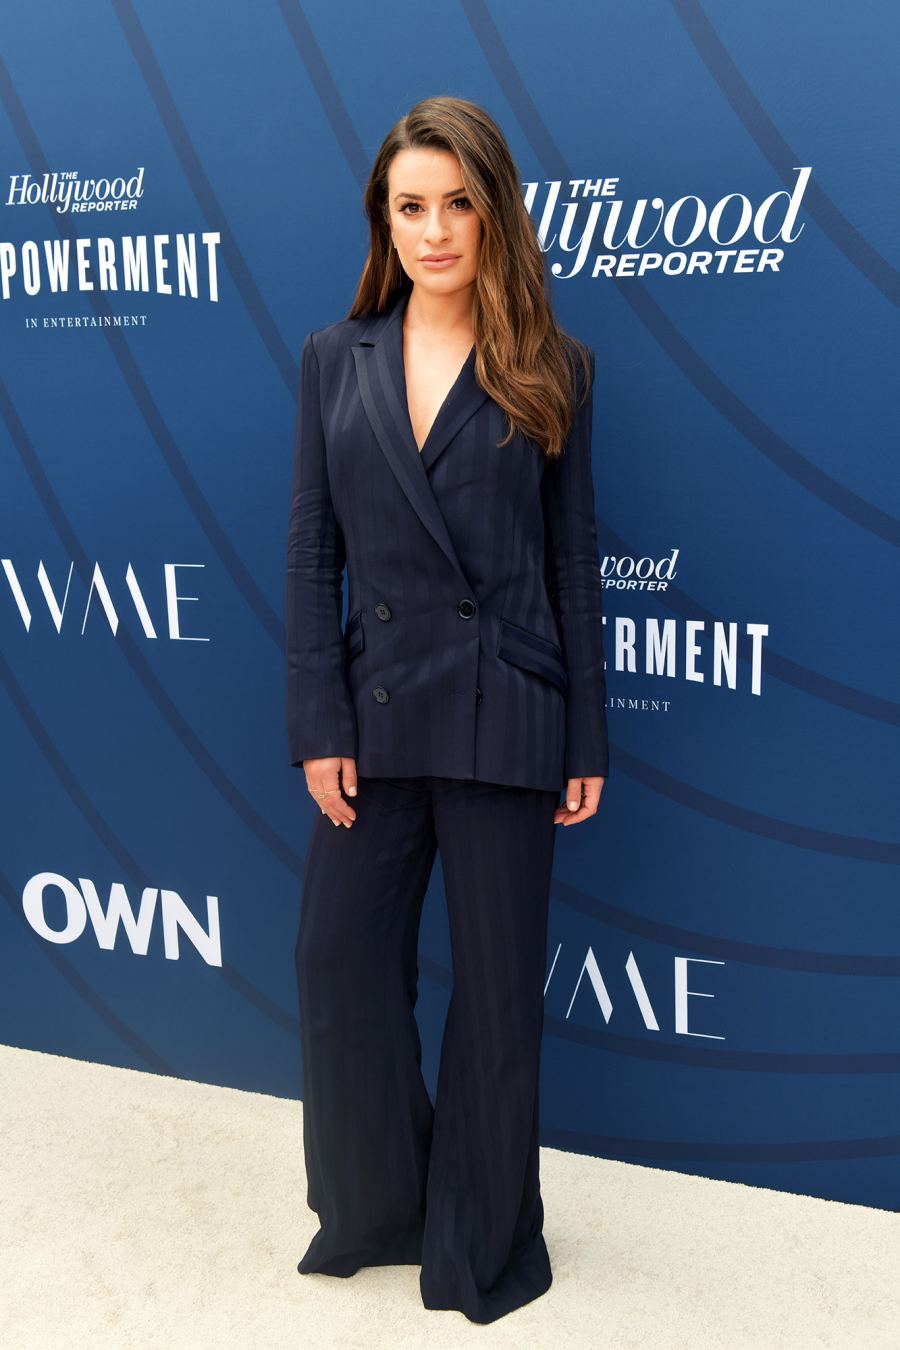 Lea Michele The Hollywood Reporter's Empowerment In Entertainment Event